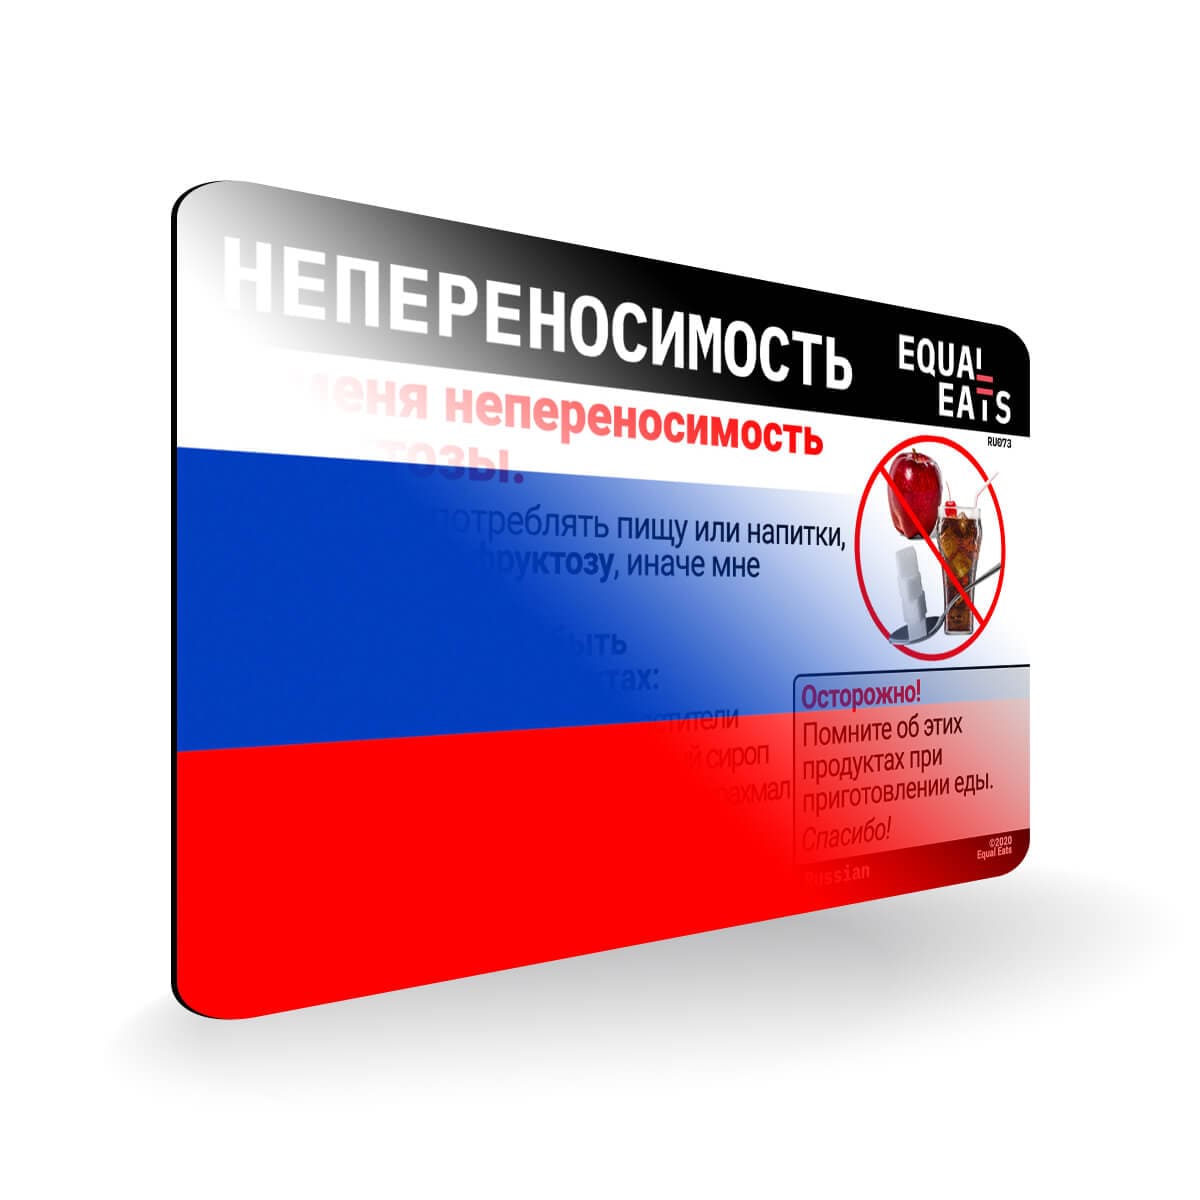 Fructose Intolerance in Russian. Fructose Intolerant Card for Russia